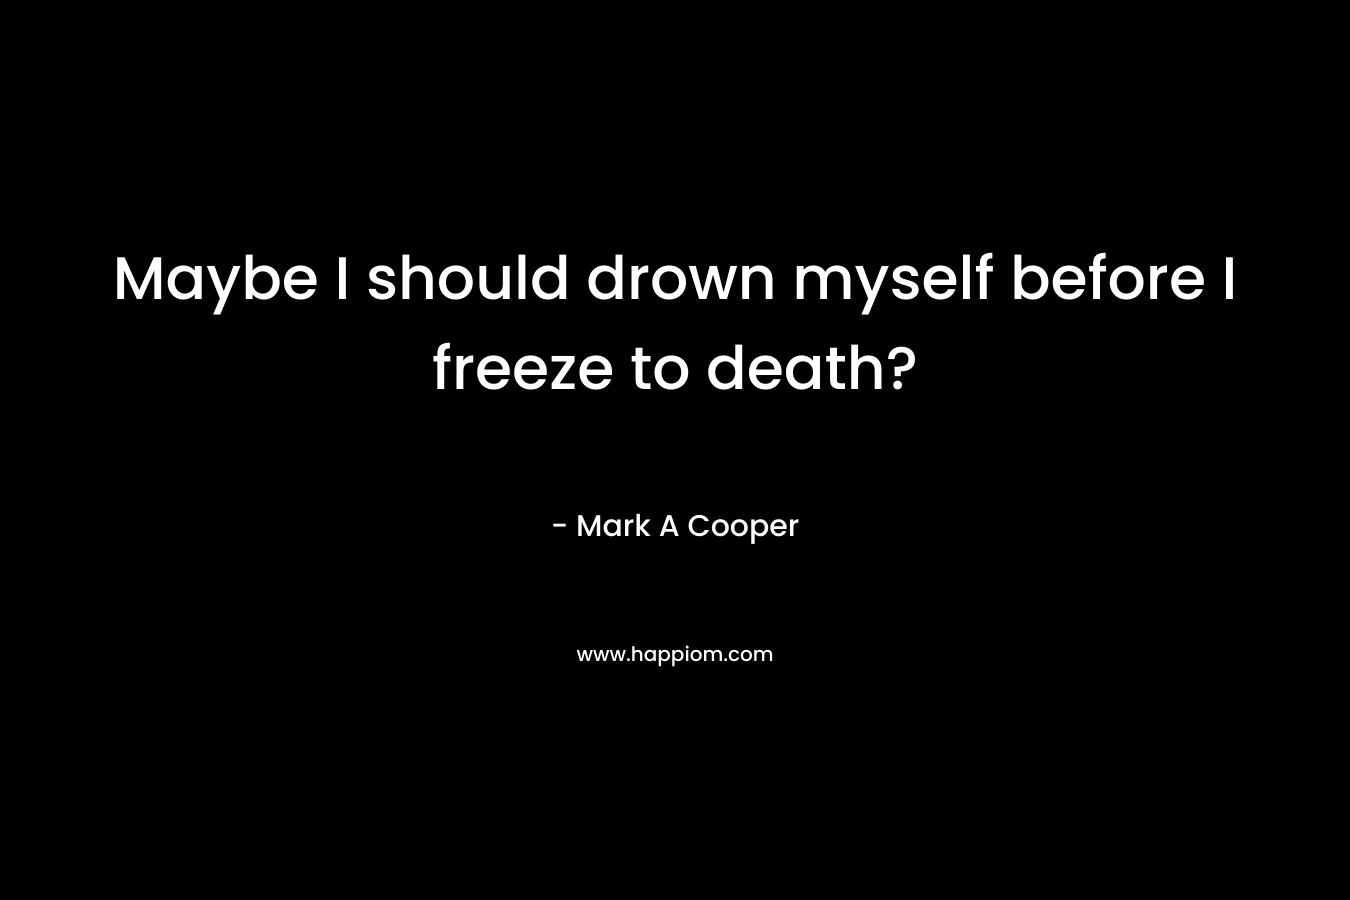 Maybe I should drown myself before I freeze to death? – Mark A Cooper